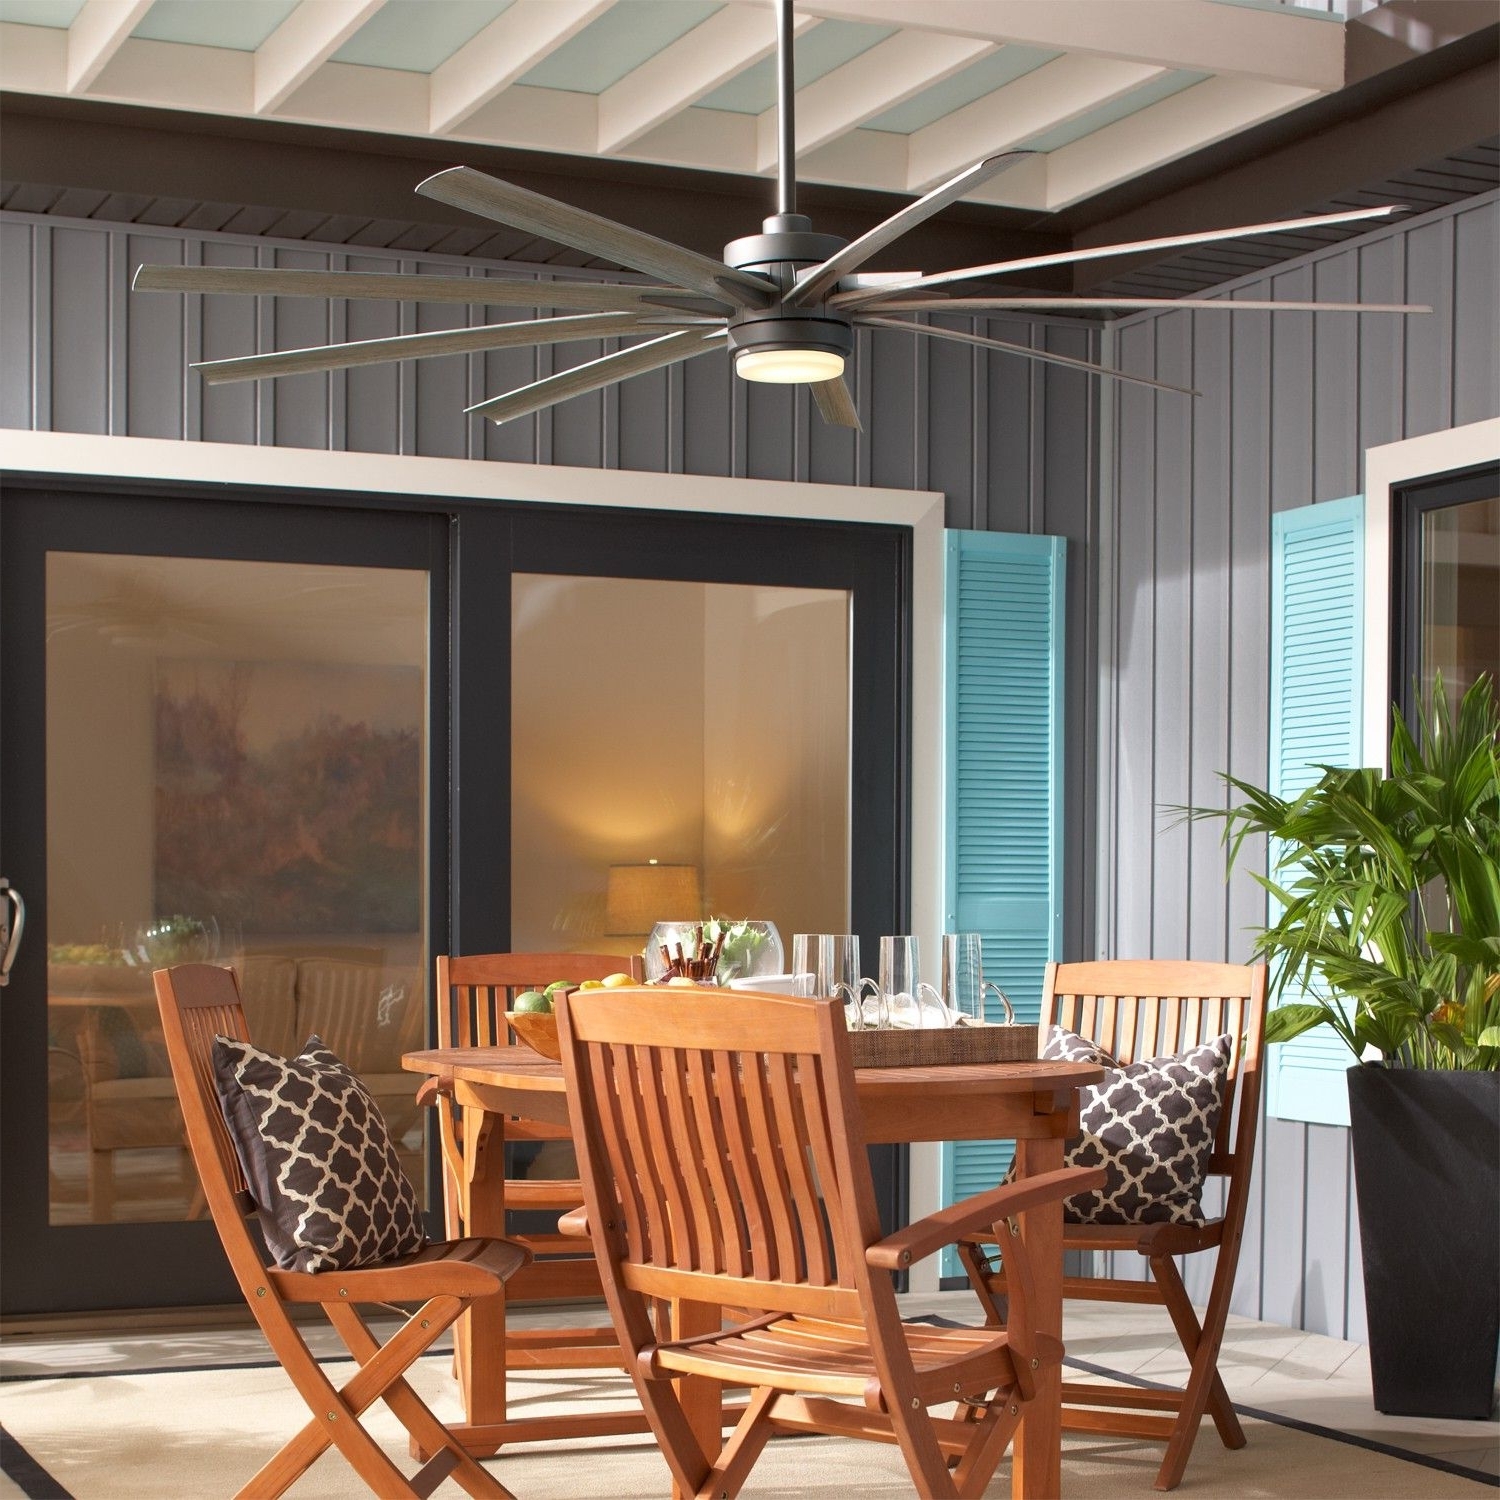 Outdoor Ceiling Fans For Patios